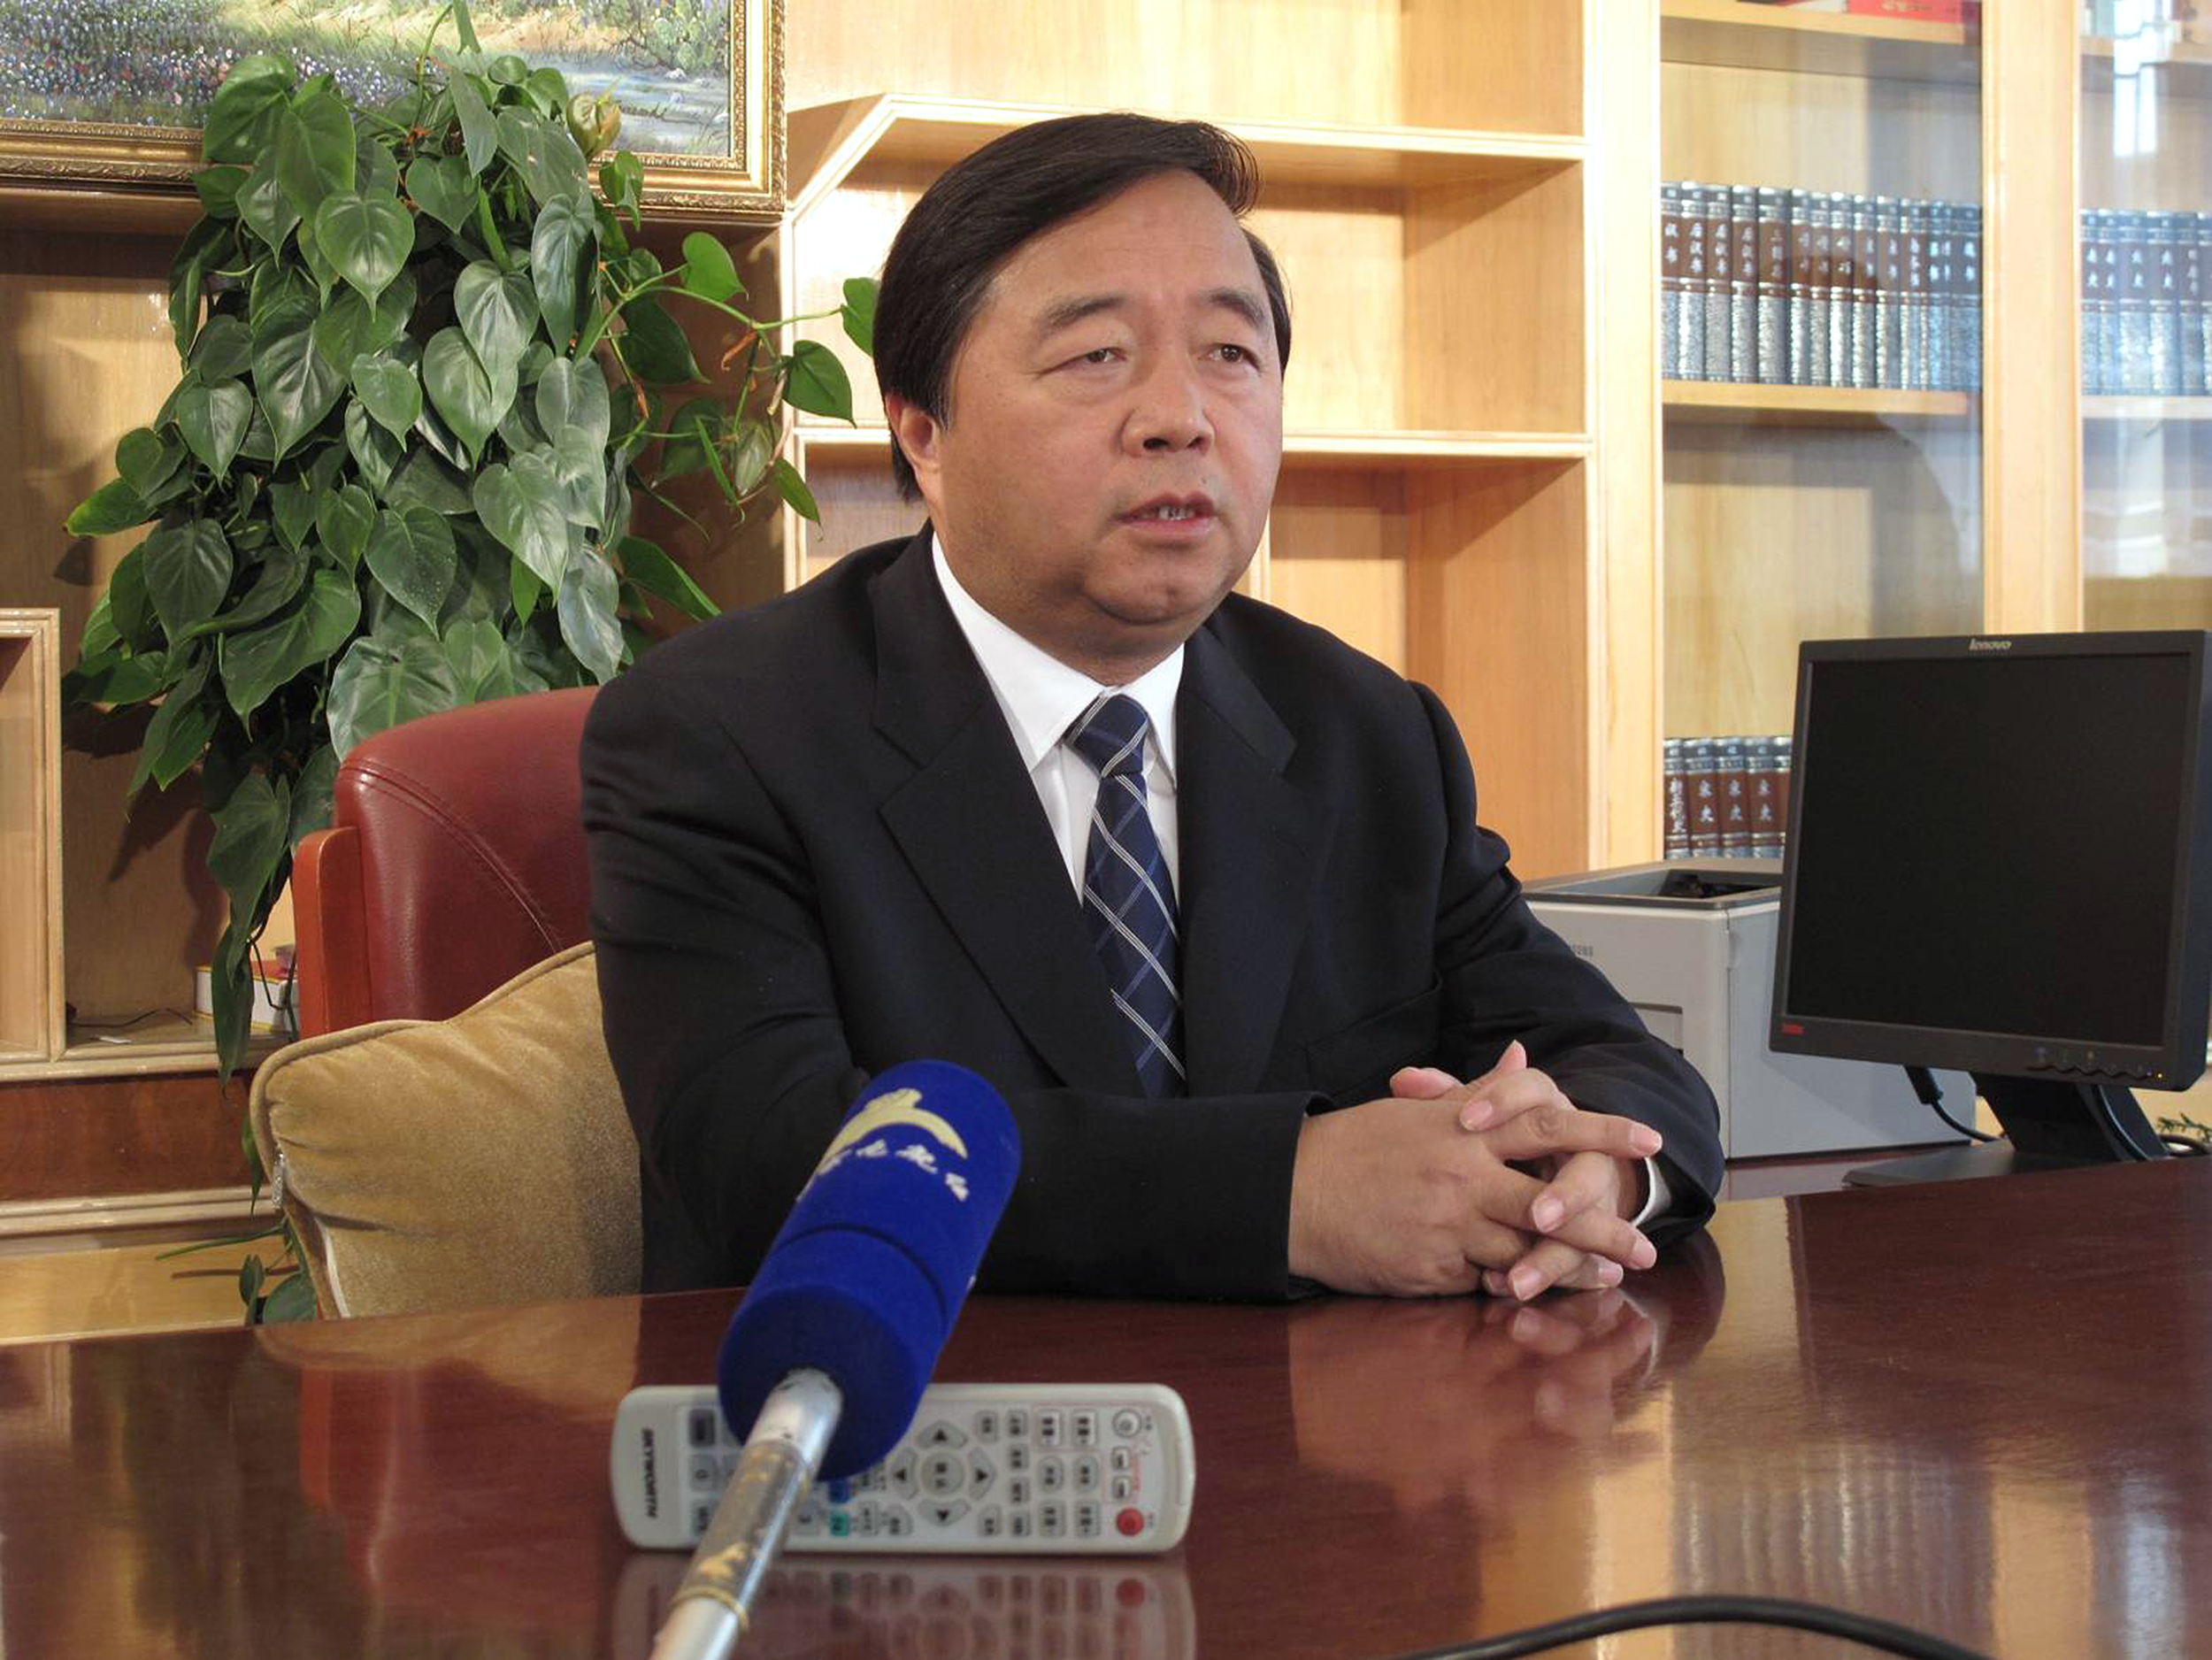 Ji Jianye is one of the highest-ranking officials to be caught by the anti-corruption drive launched by President Xi Jinping. Photo: SCMP Pictures